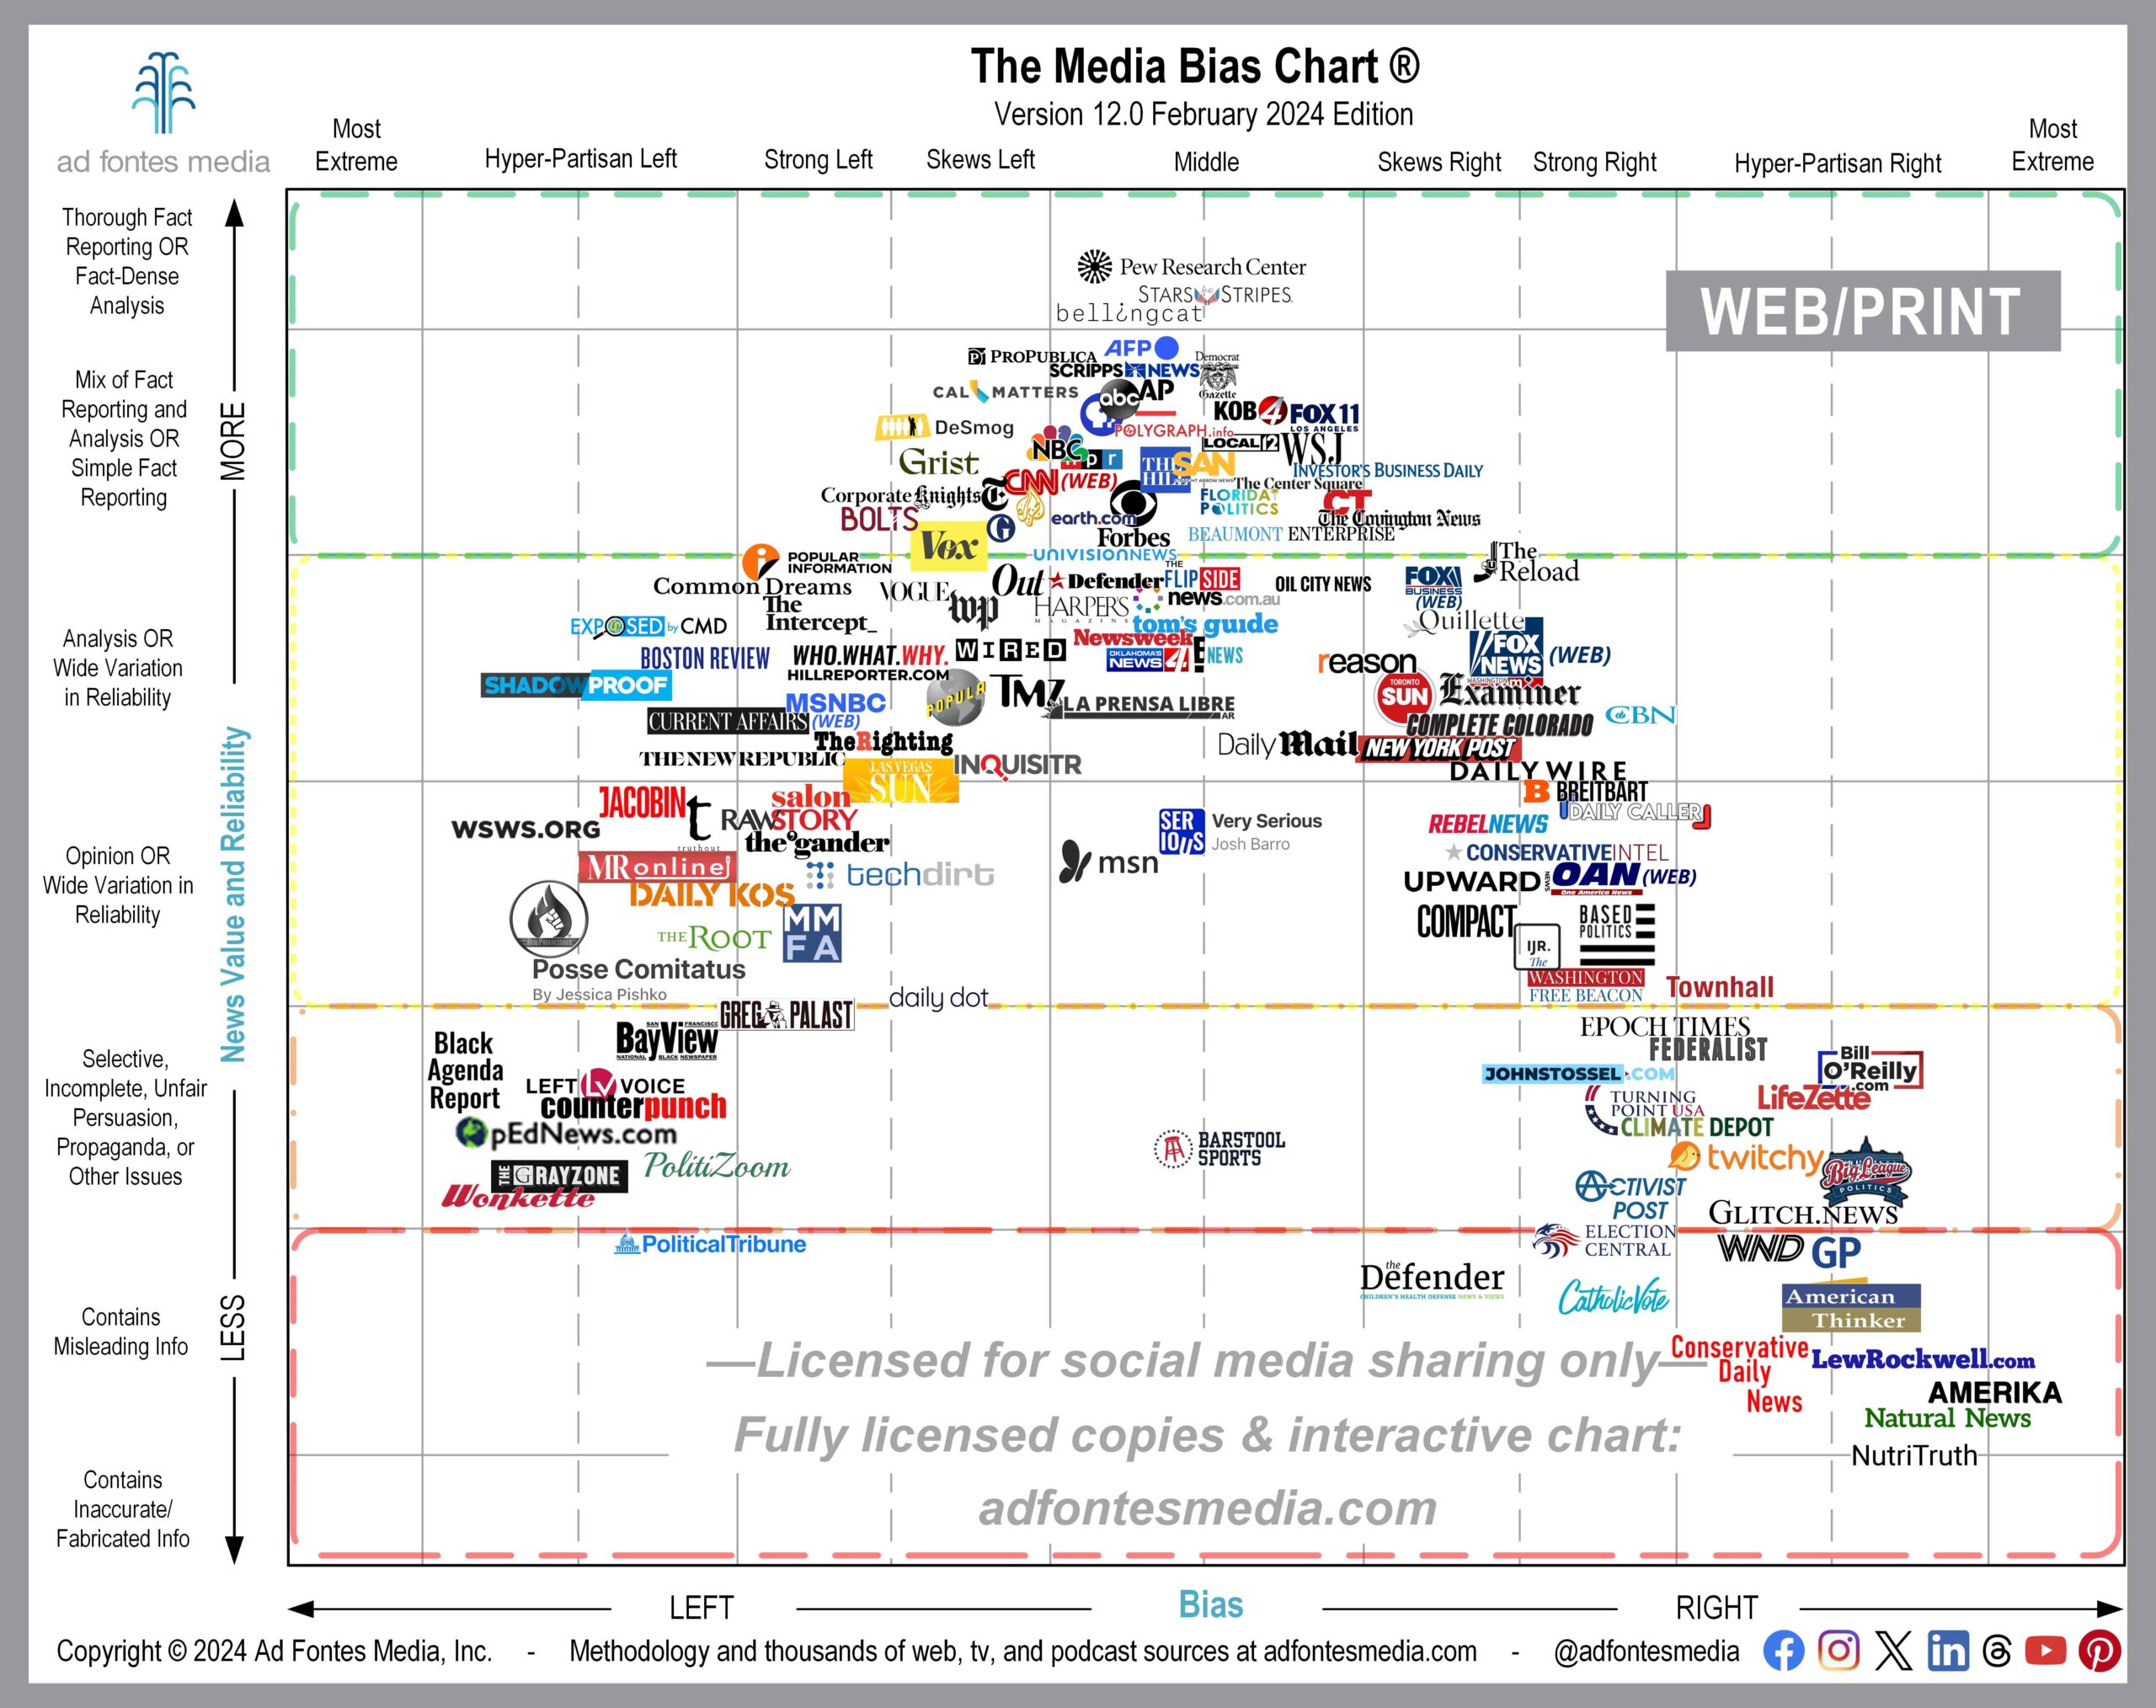 Ad Fontes Media Features 141 Sources on February’s Web Edition of Media Bias Chart